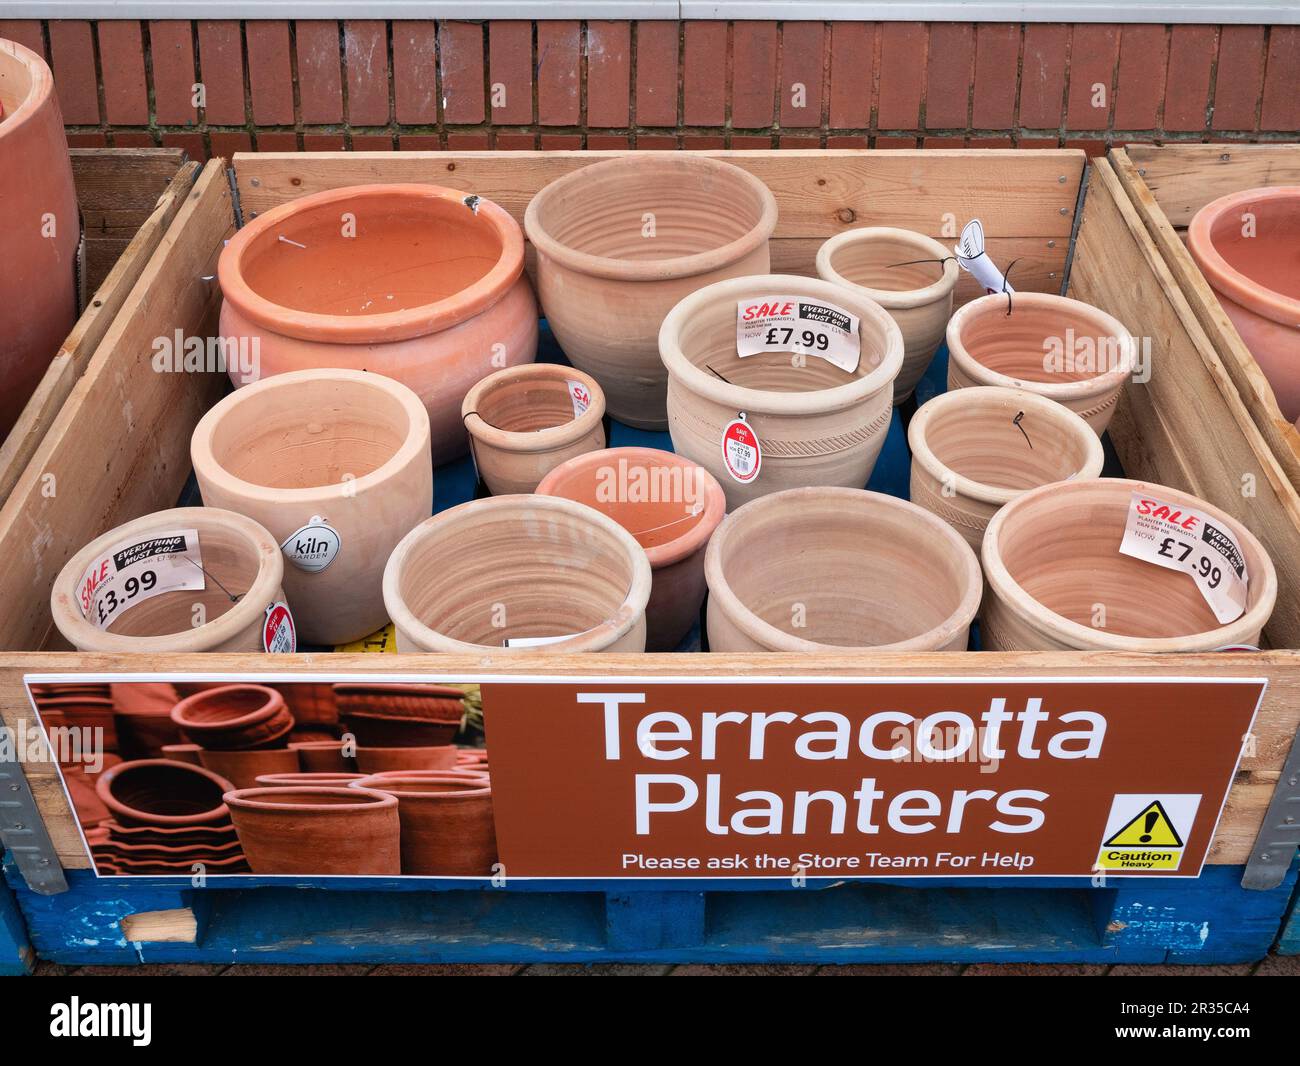 https://c8.alamy.com/comp/2R35CA4/low-cost-terracotta-plant-pots-and-planters-for-sale-in-redcar-cleveland-high-street-2R35CA4.jpg